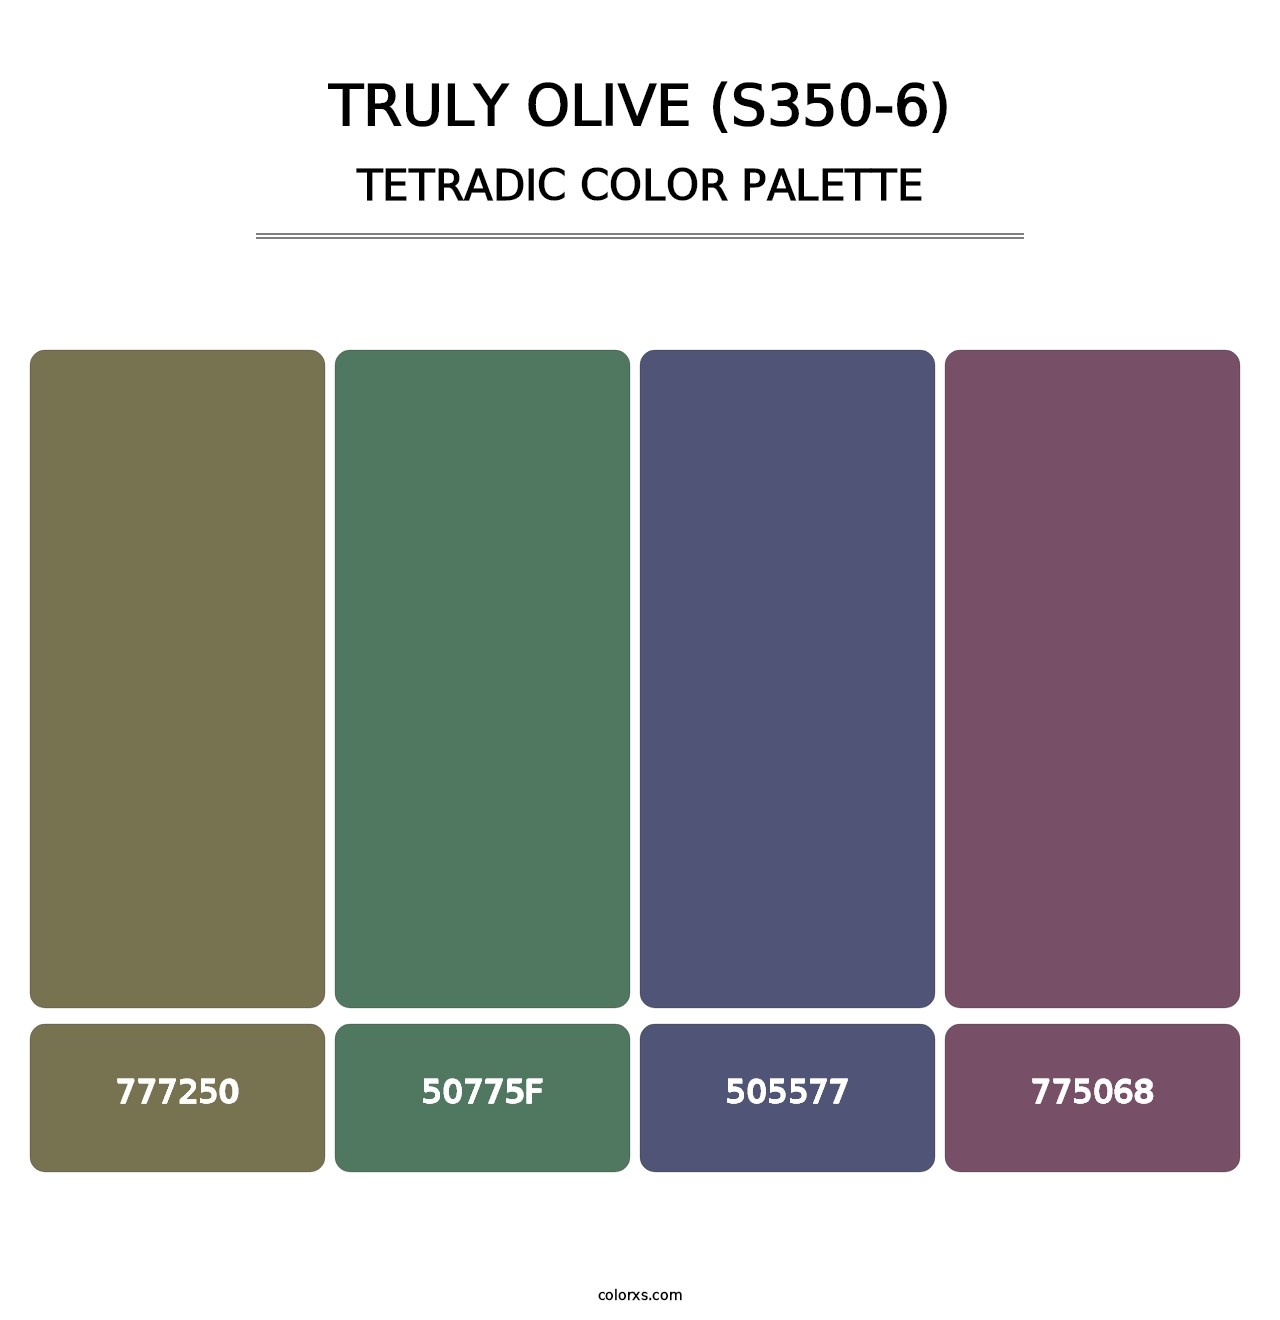 Truly Olive (S350-6) - Tetradic Color Palette